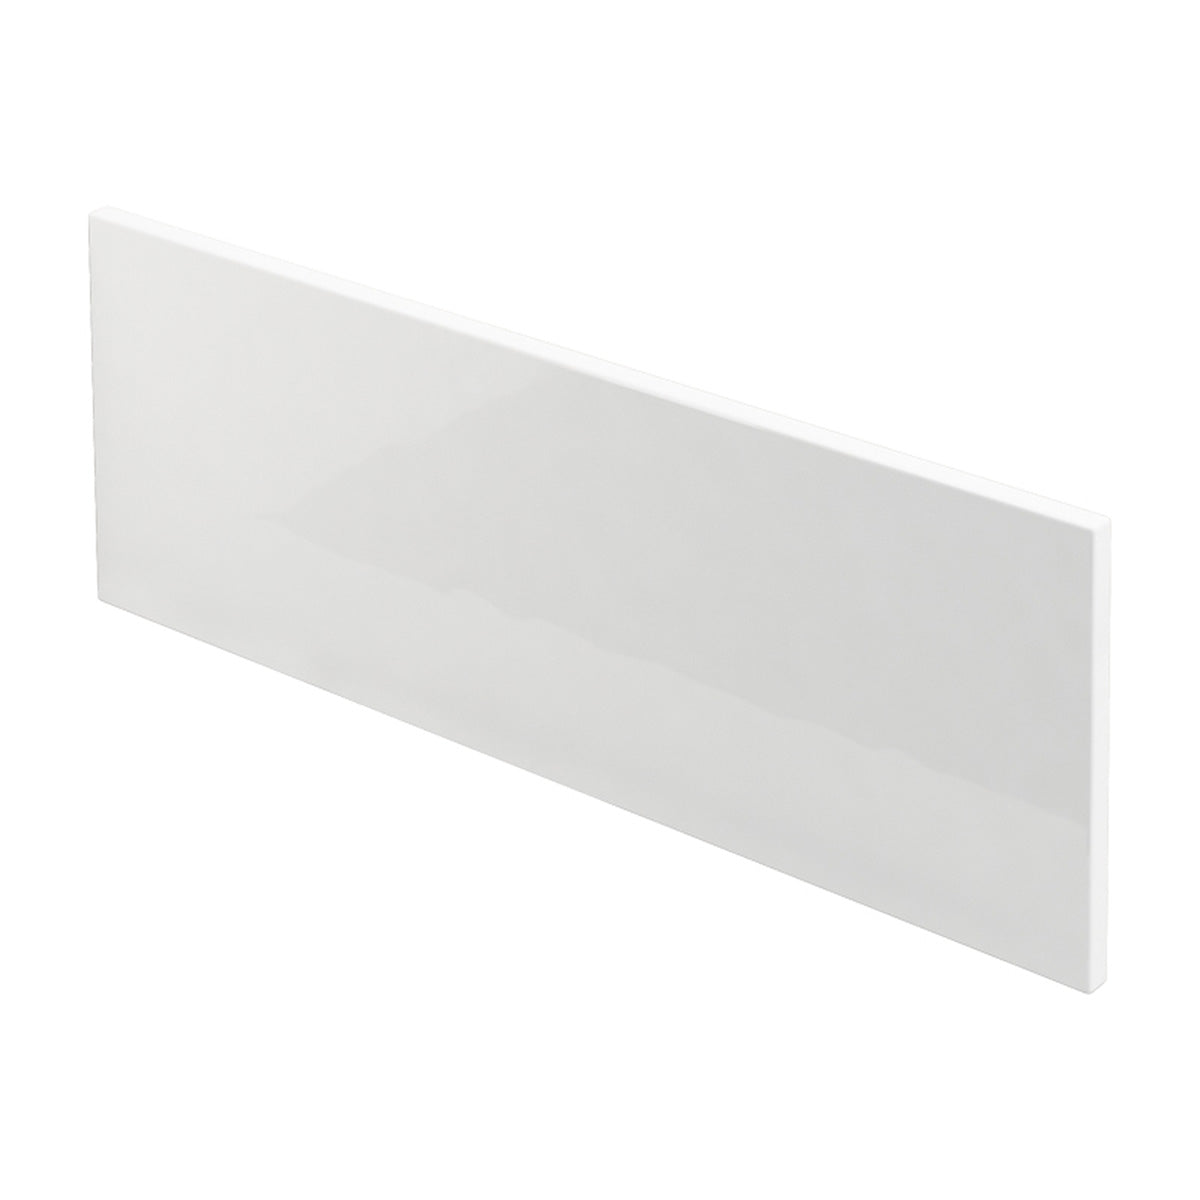 Cleargreen Front Bath Panel White Gloss